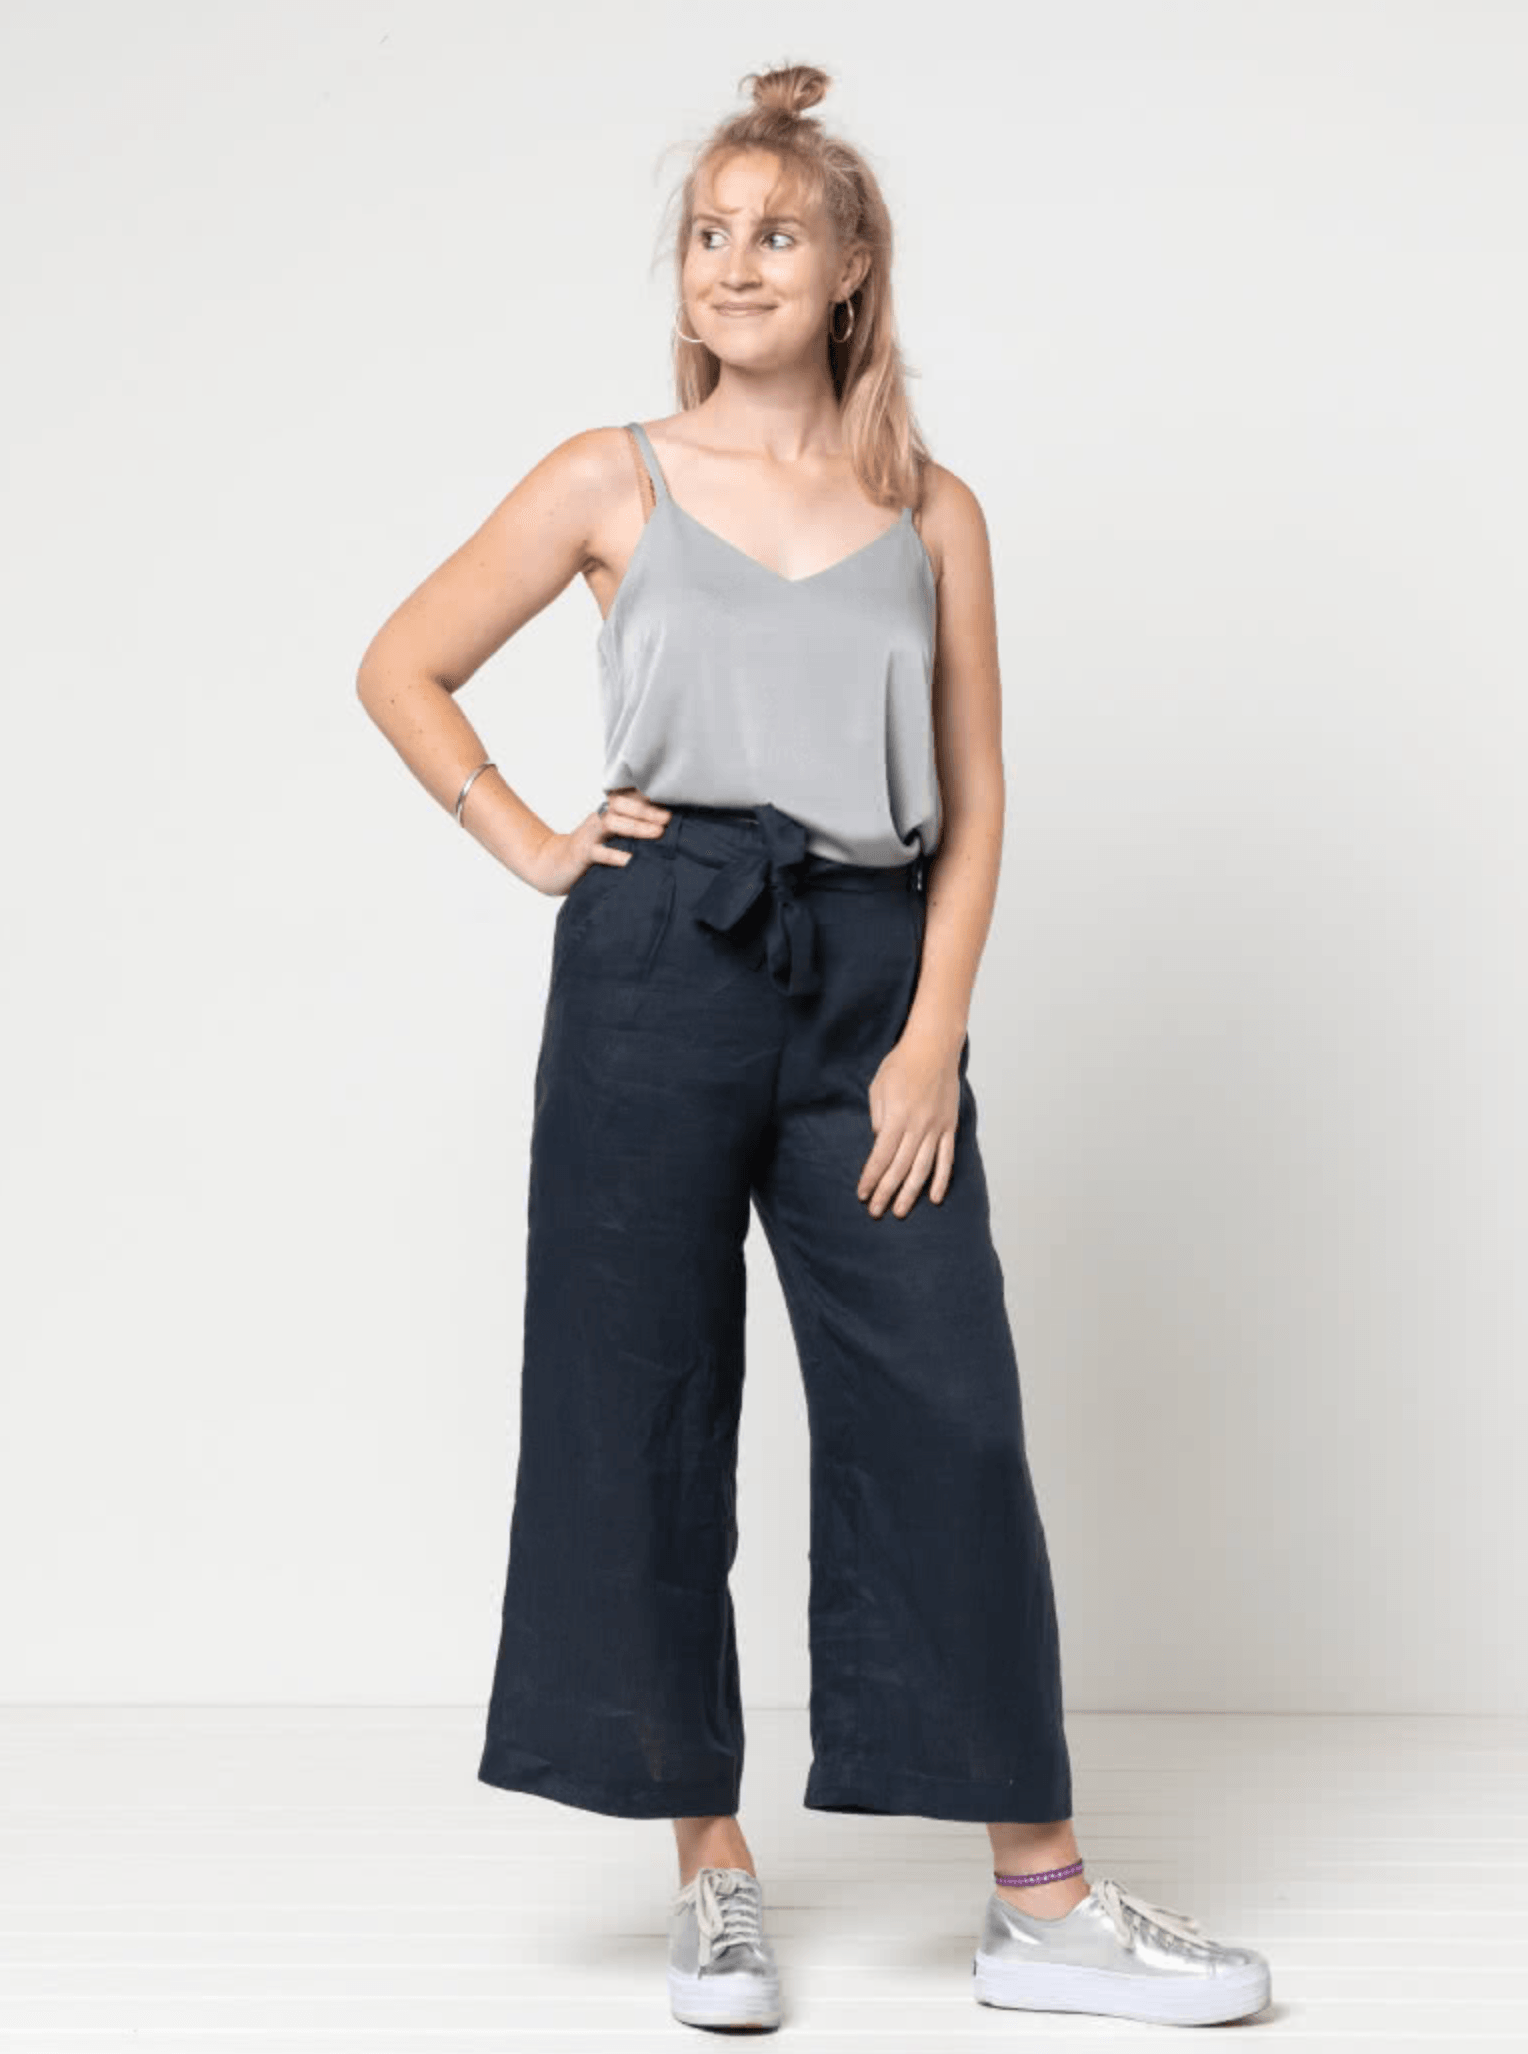 Style Arc Clare Pant Sizes 4 - 16